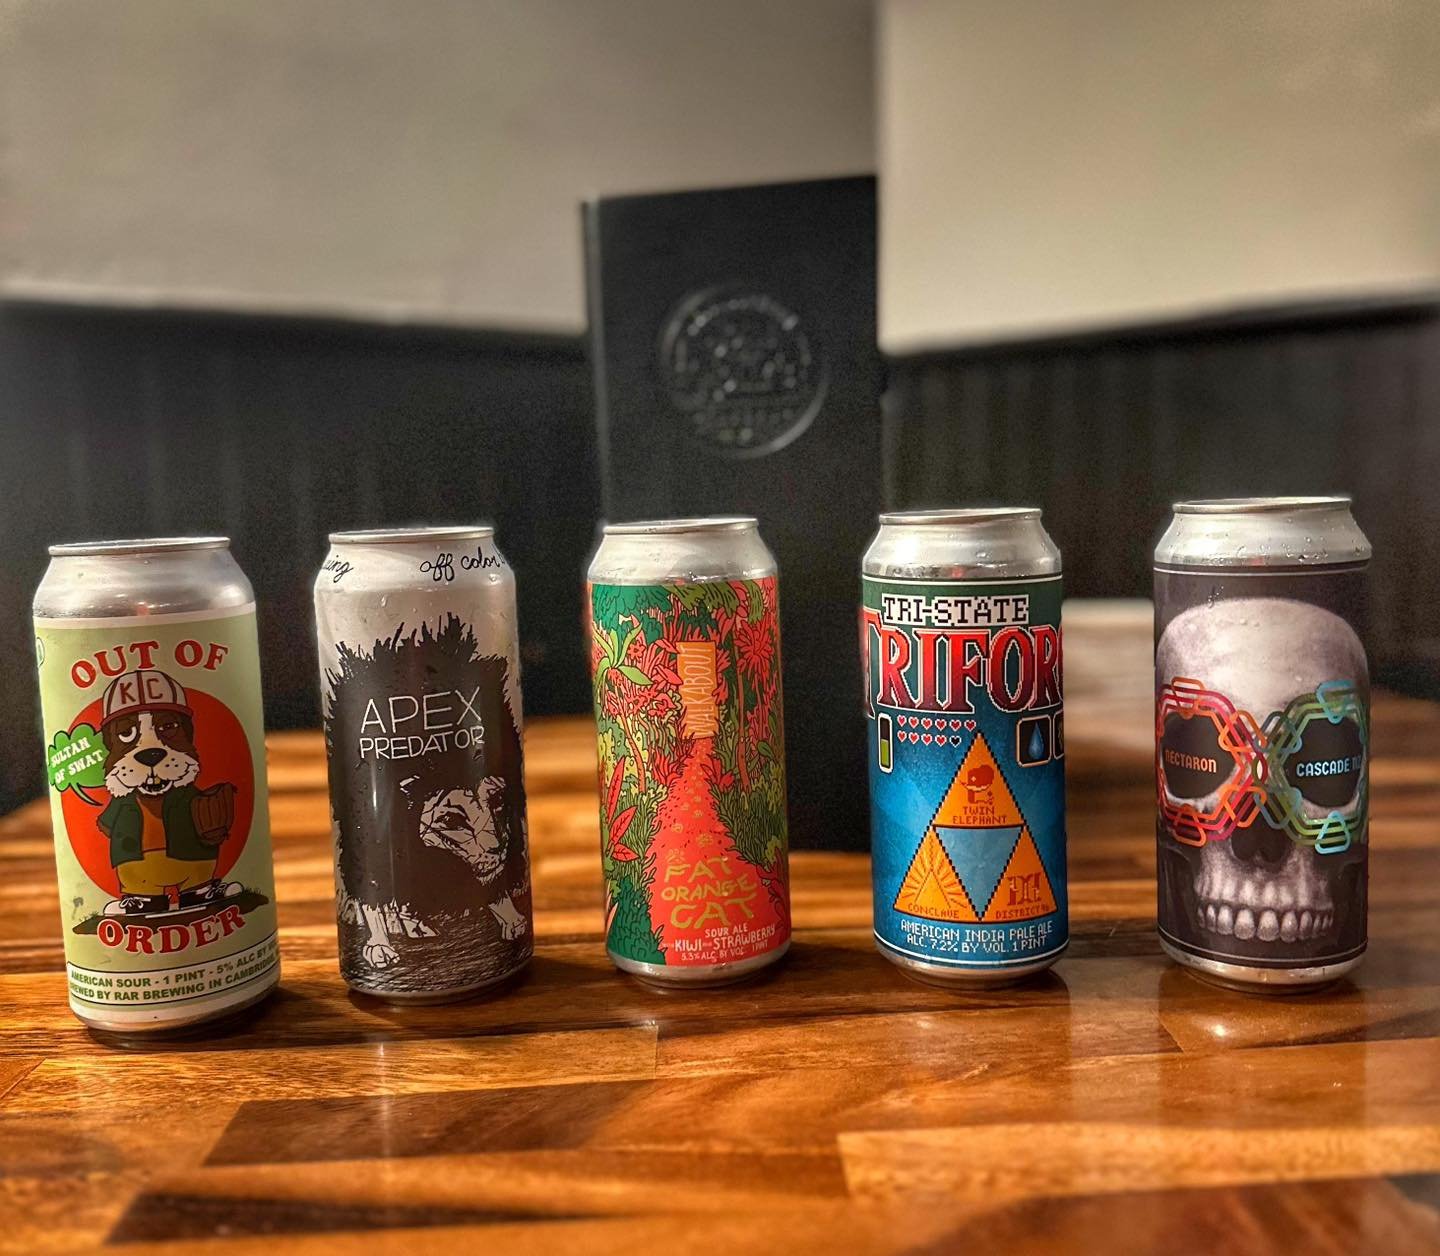 🍻 New Beer Drop! 🍻 

New Beer in from RaR Brewing: Out of Order: Sultan of Swat (Blueberries, Raspberry, Cotton Candy Sour)

Off Color: Apex Predator Saison

Fat Orange Cat Walkabout Kiwi Strawberry Sour

Twin Elephant: Tri-state Triforce &amp; Nos